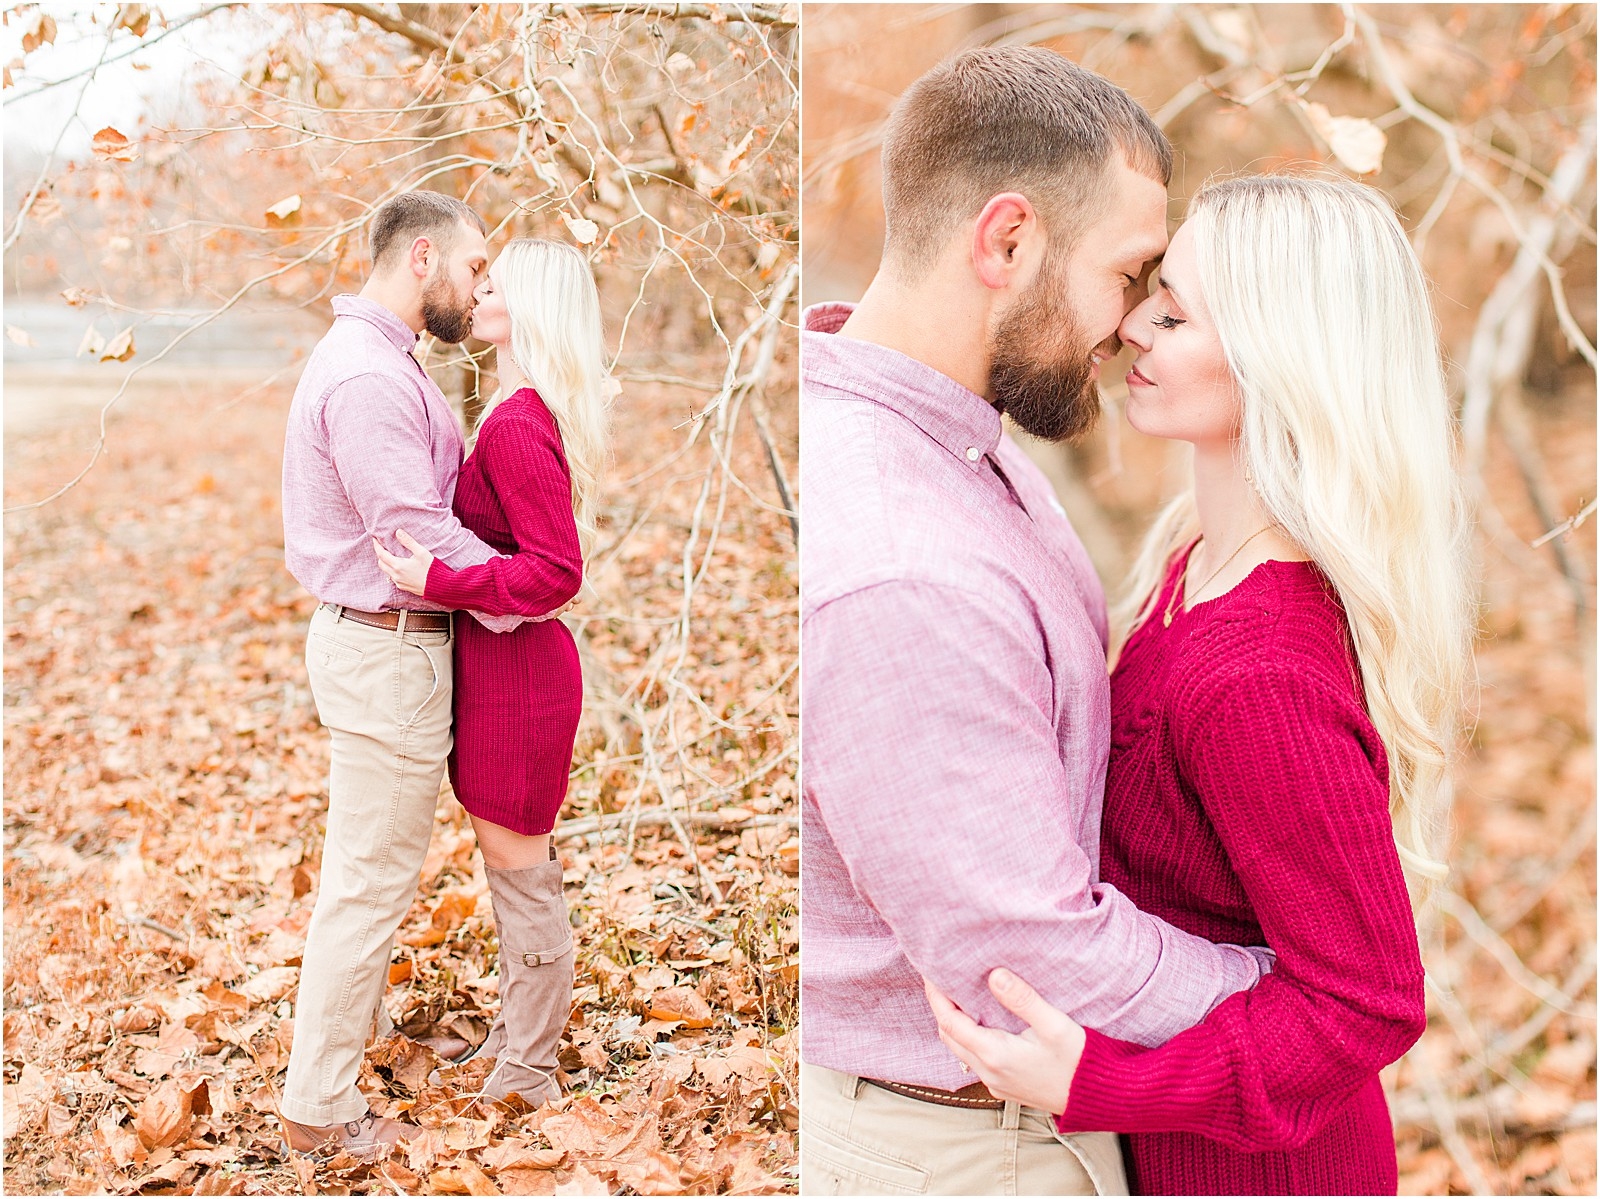 An sweet and snuggly fall anniversary session in Loogootee, Indiana. | #anniversarysession #fallsession #southernindianawedding | 016.jpg